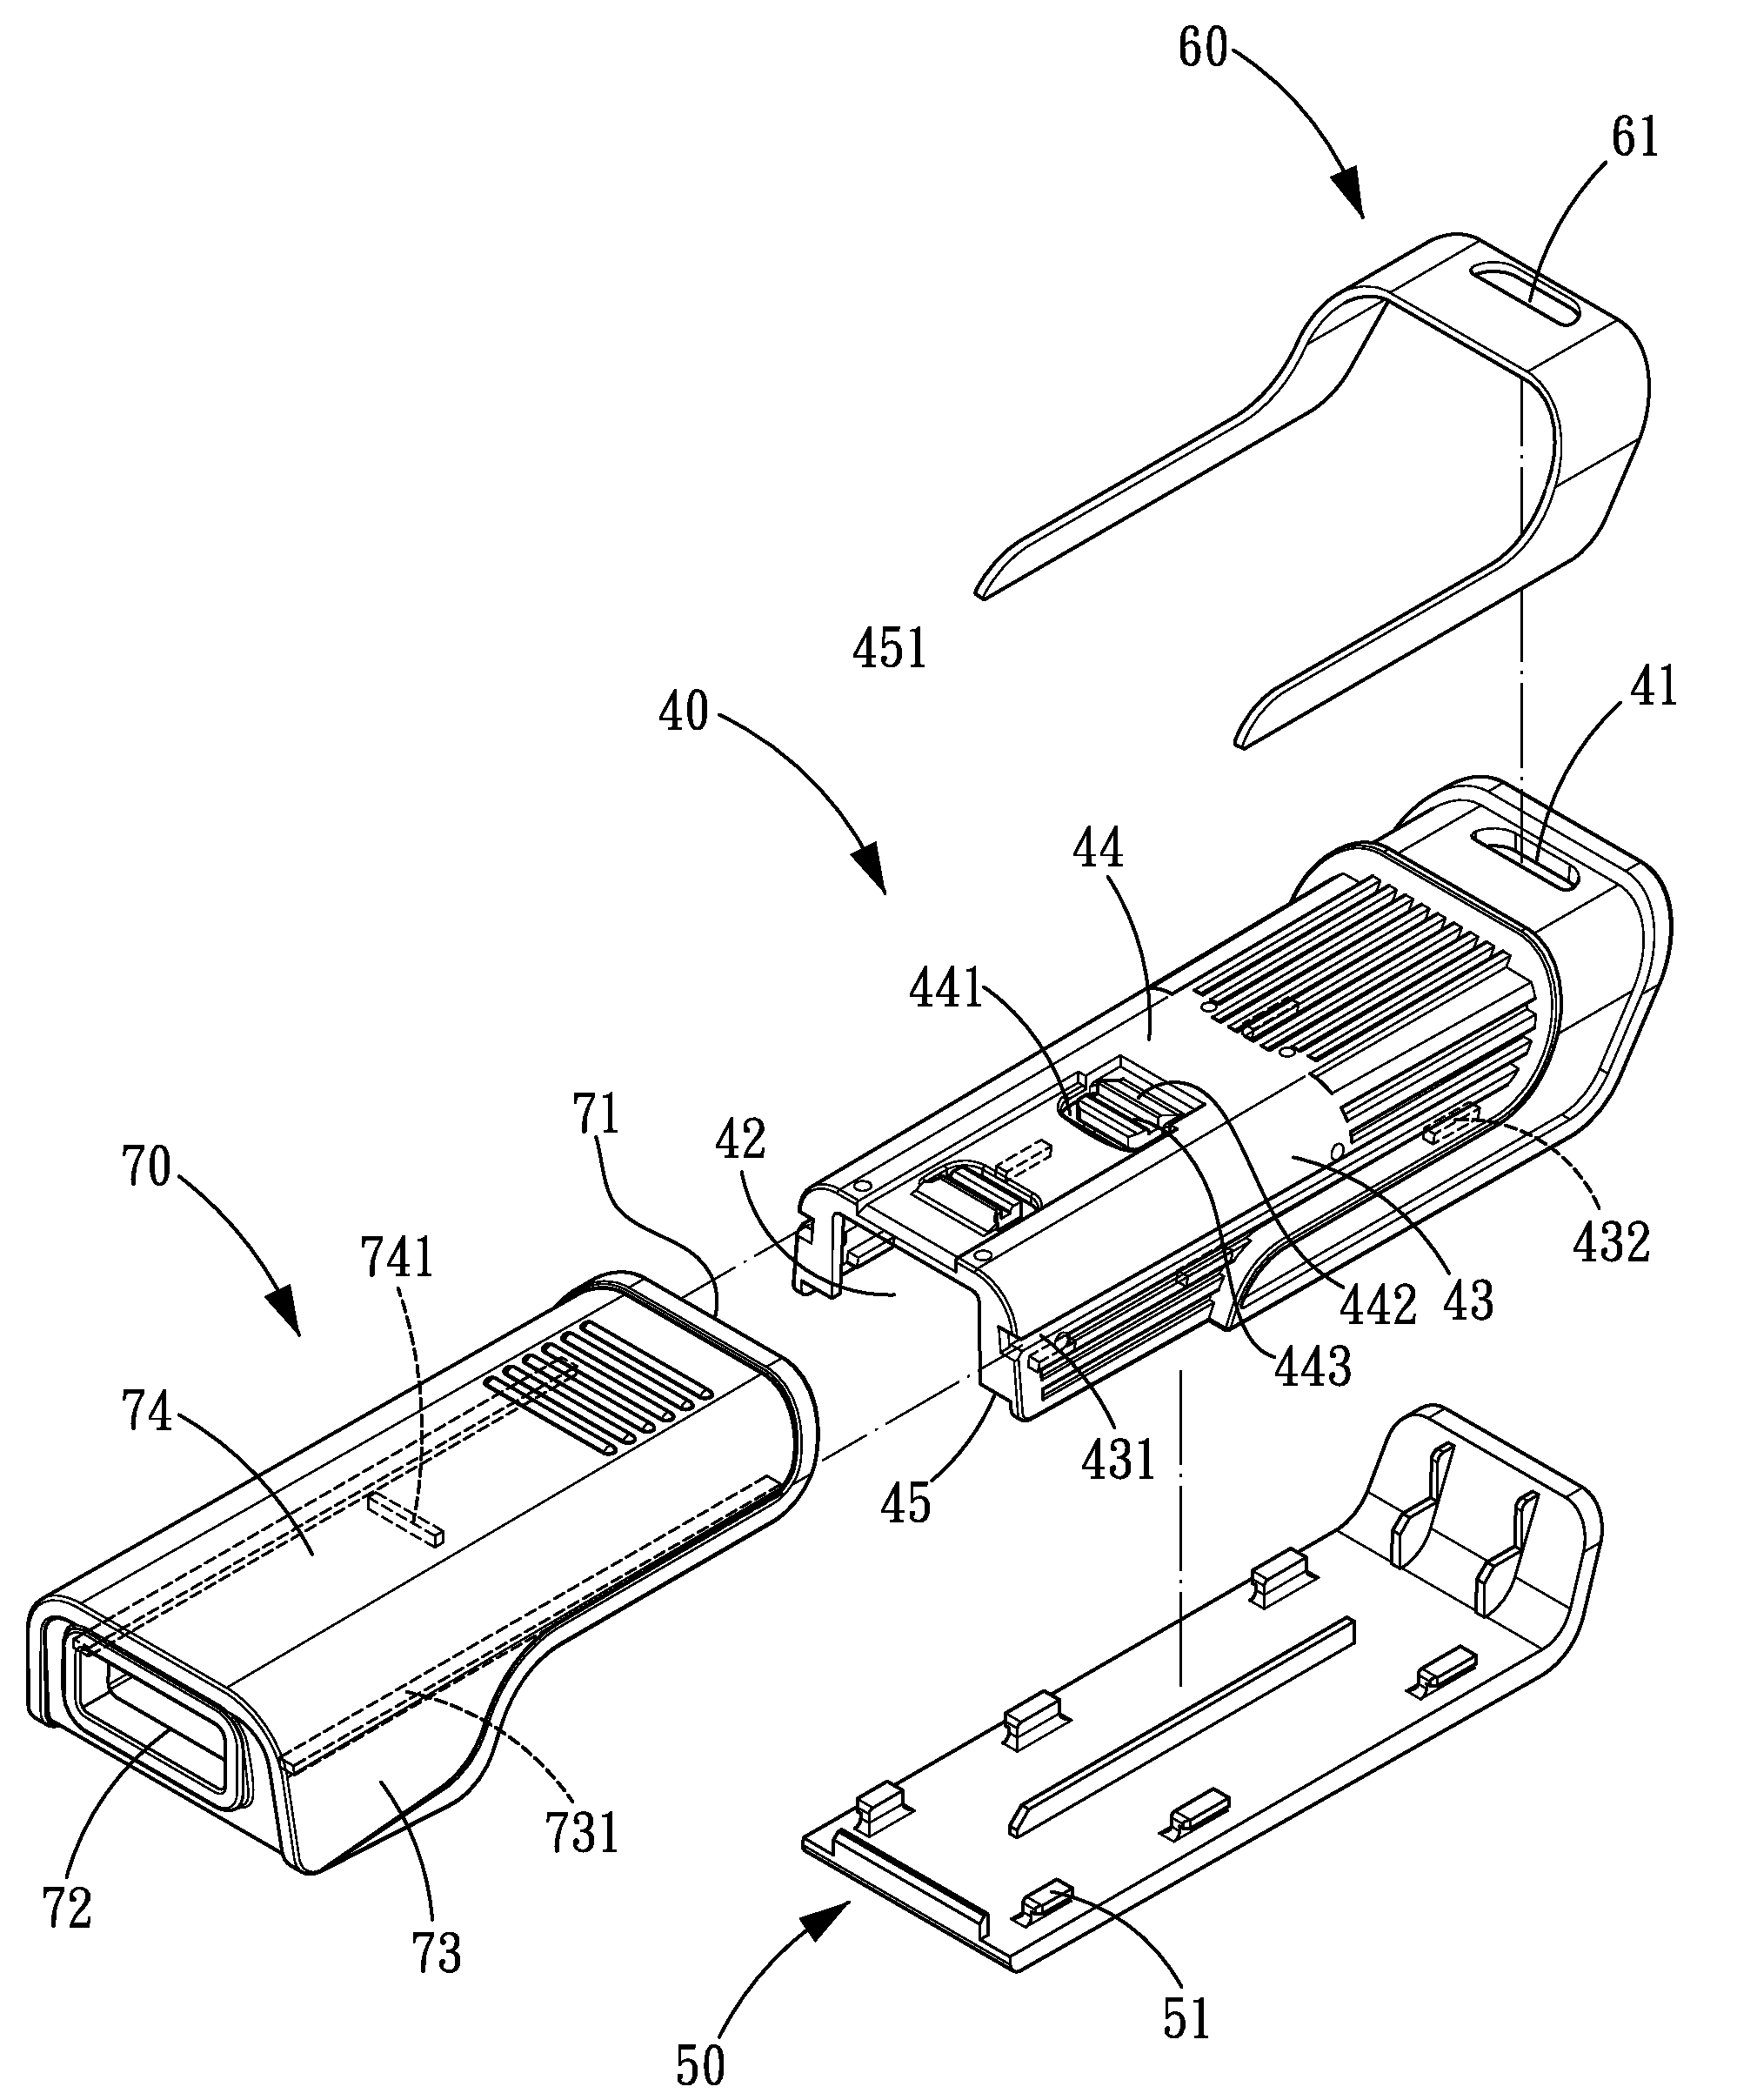 Portable Extension Memory Storage Device